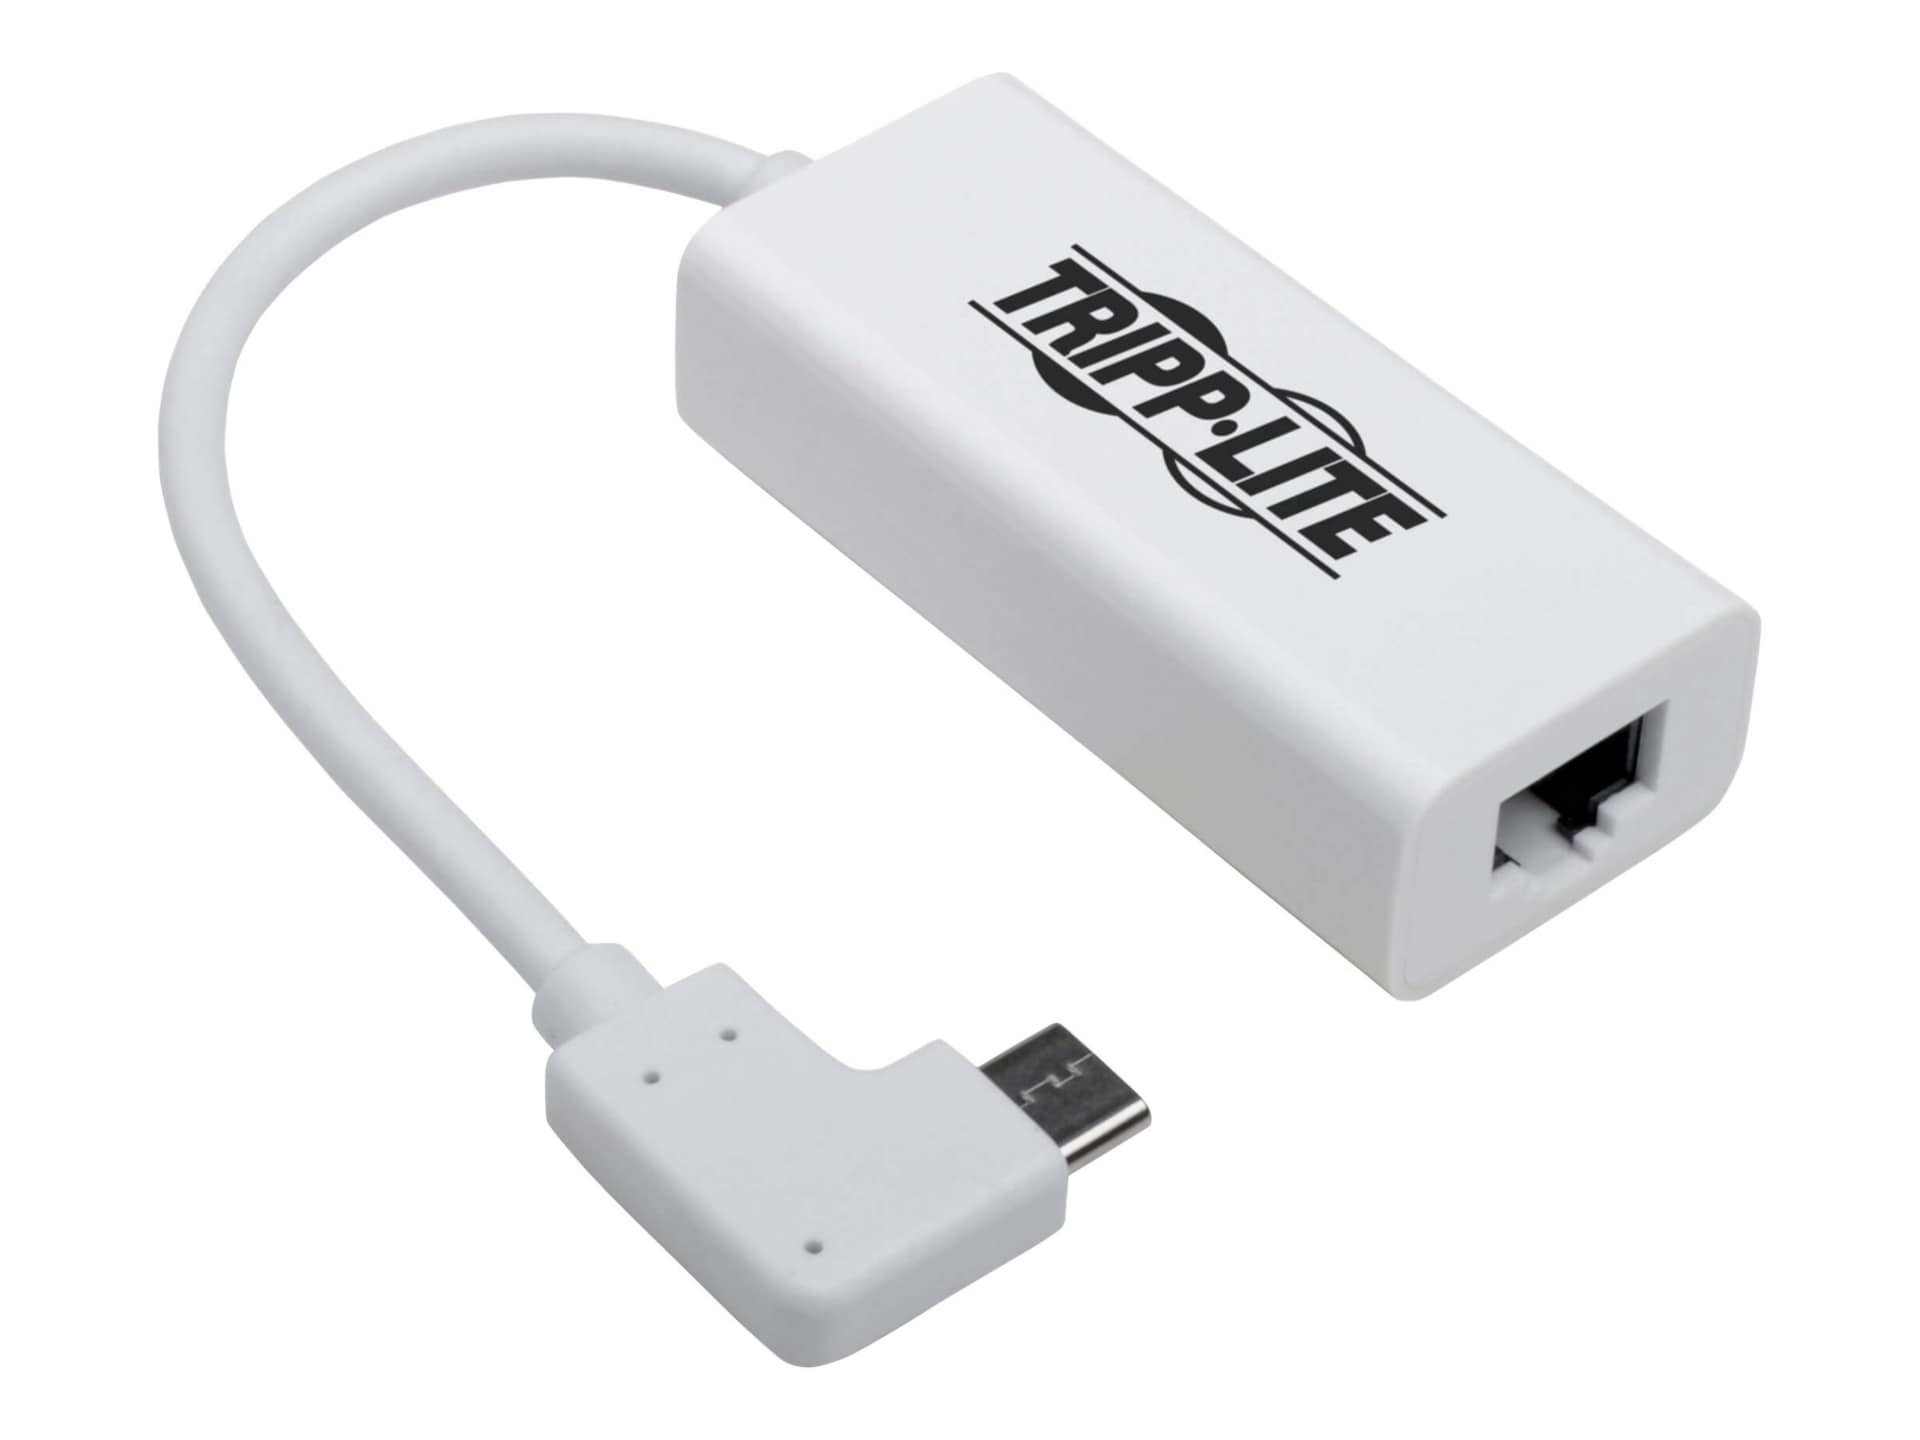 Eaton Tripp Lite Series USB C to Gigabit Adapter Converter USB 3.1 Gen 1 Right-Angle White 6in USB Type C to Ethernet